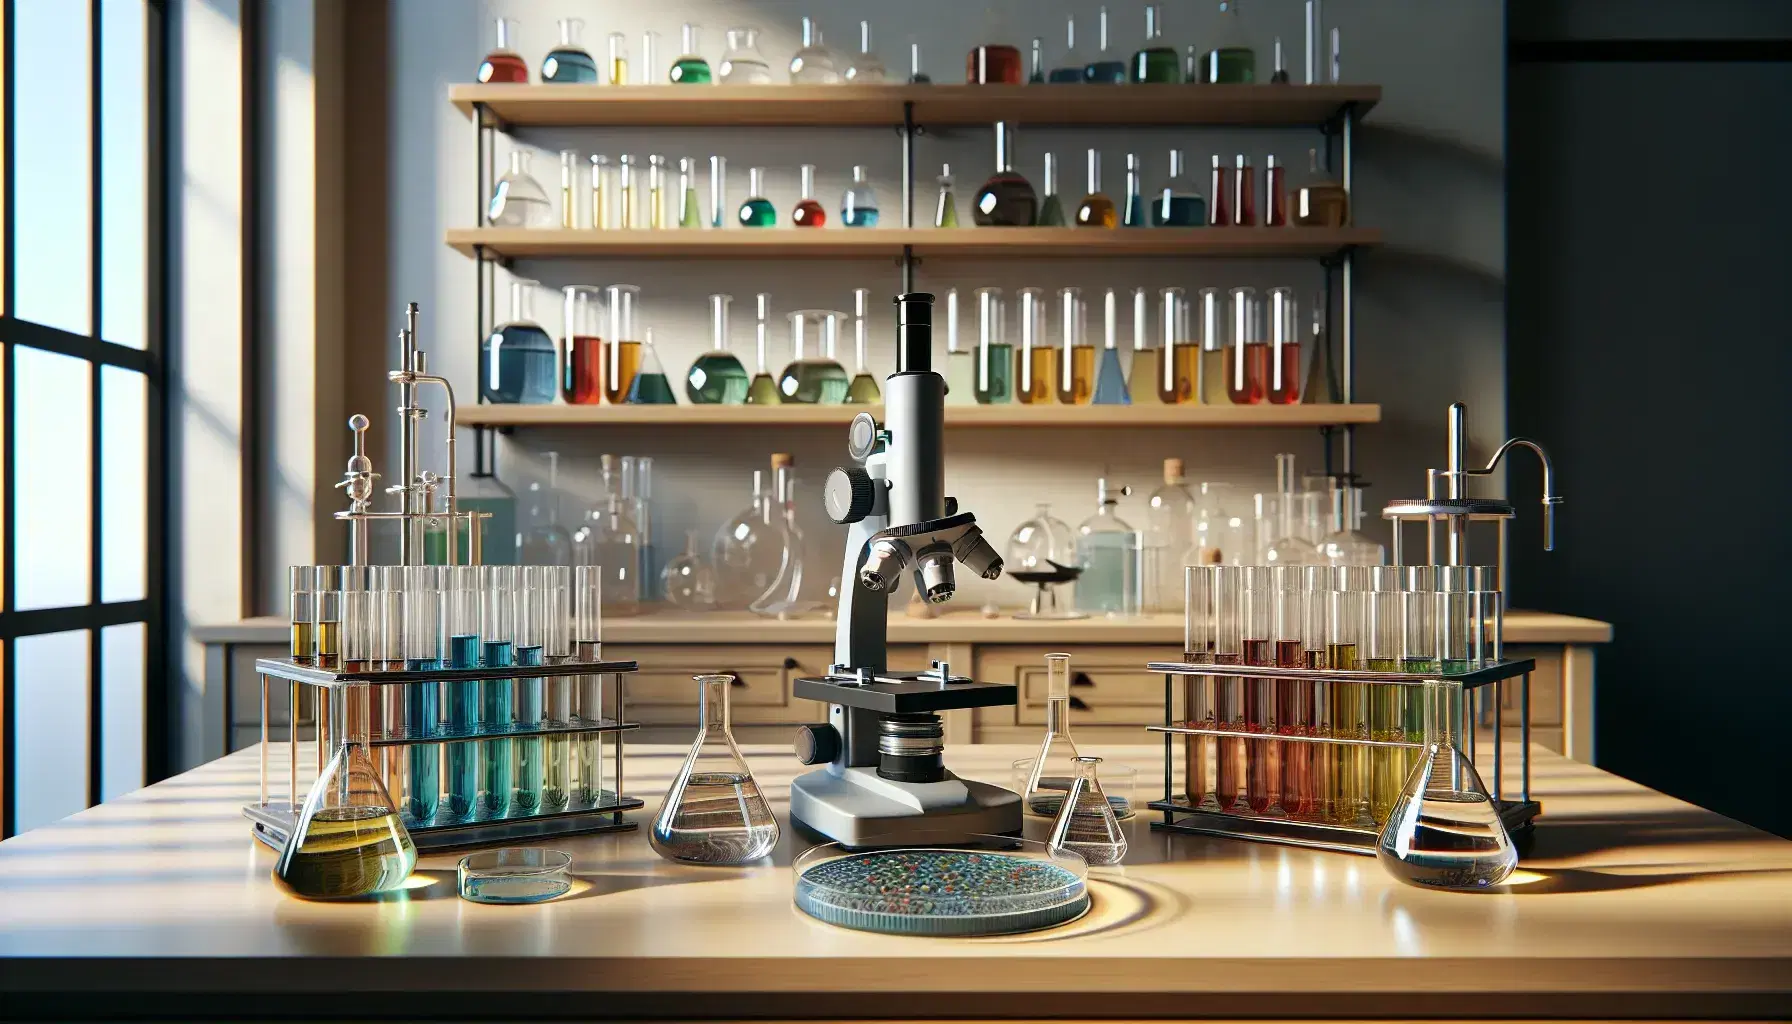 Laboratory with test tubes in a rack, a microscope, petri dish, and shelves with glassware under natural light, no people present.